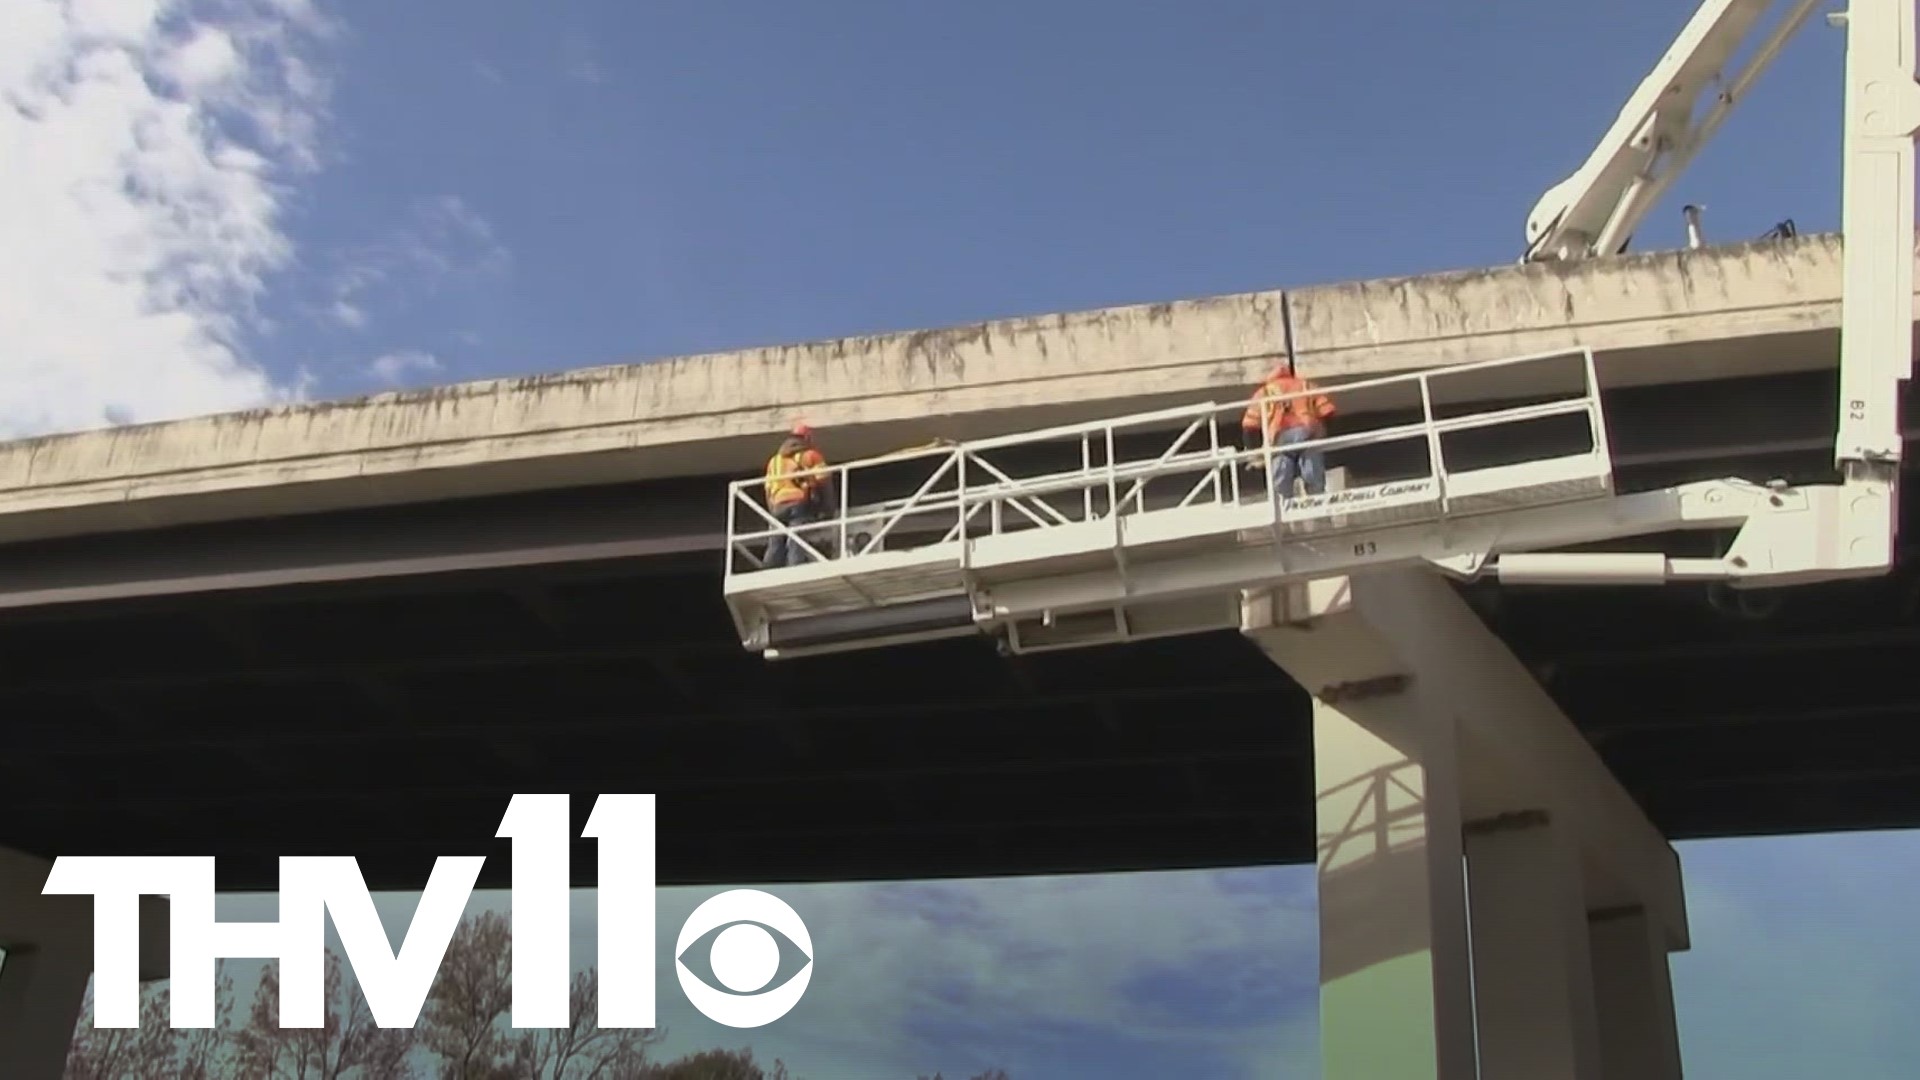 It's been two years since ARDOT officials found a crack through a beam on the I-40 River Bridge, and officials have remained dedicated to inspecting other bridges.